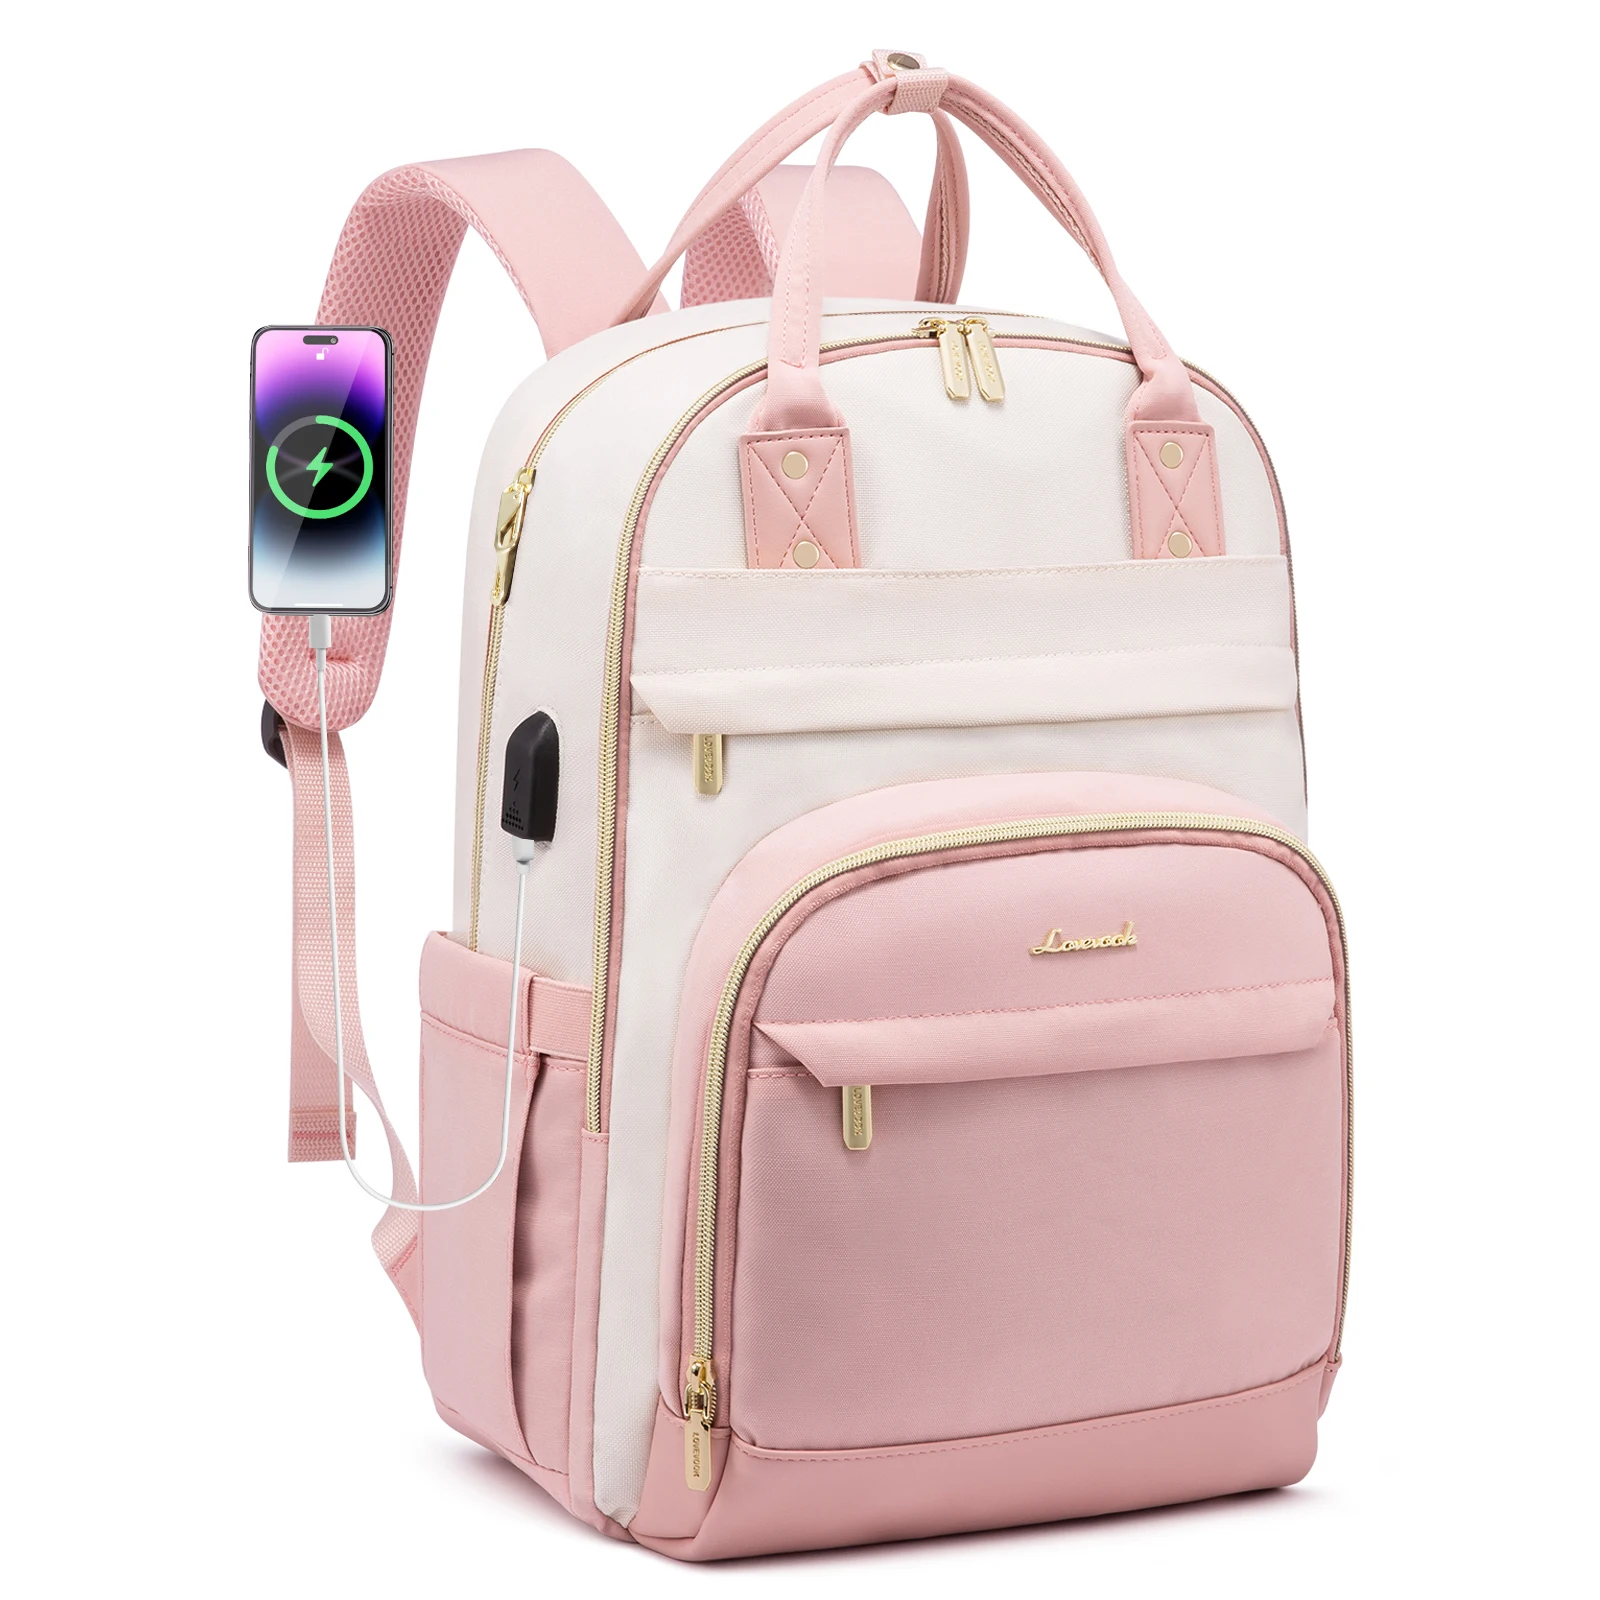 

LOVEVOOK Fashion Travel Work Anti-theft Bag with Lock Laptop Backpack Purse College School Student Bookbag Women Travel Backpack